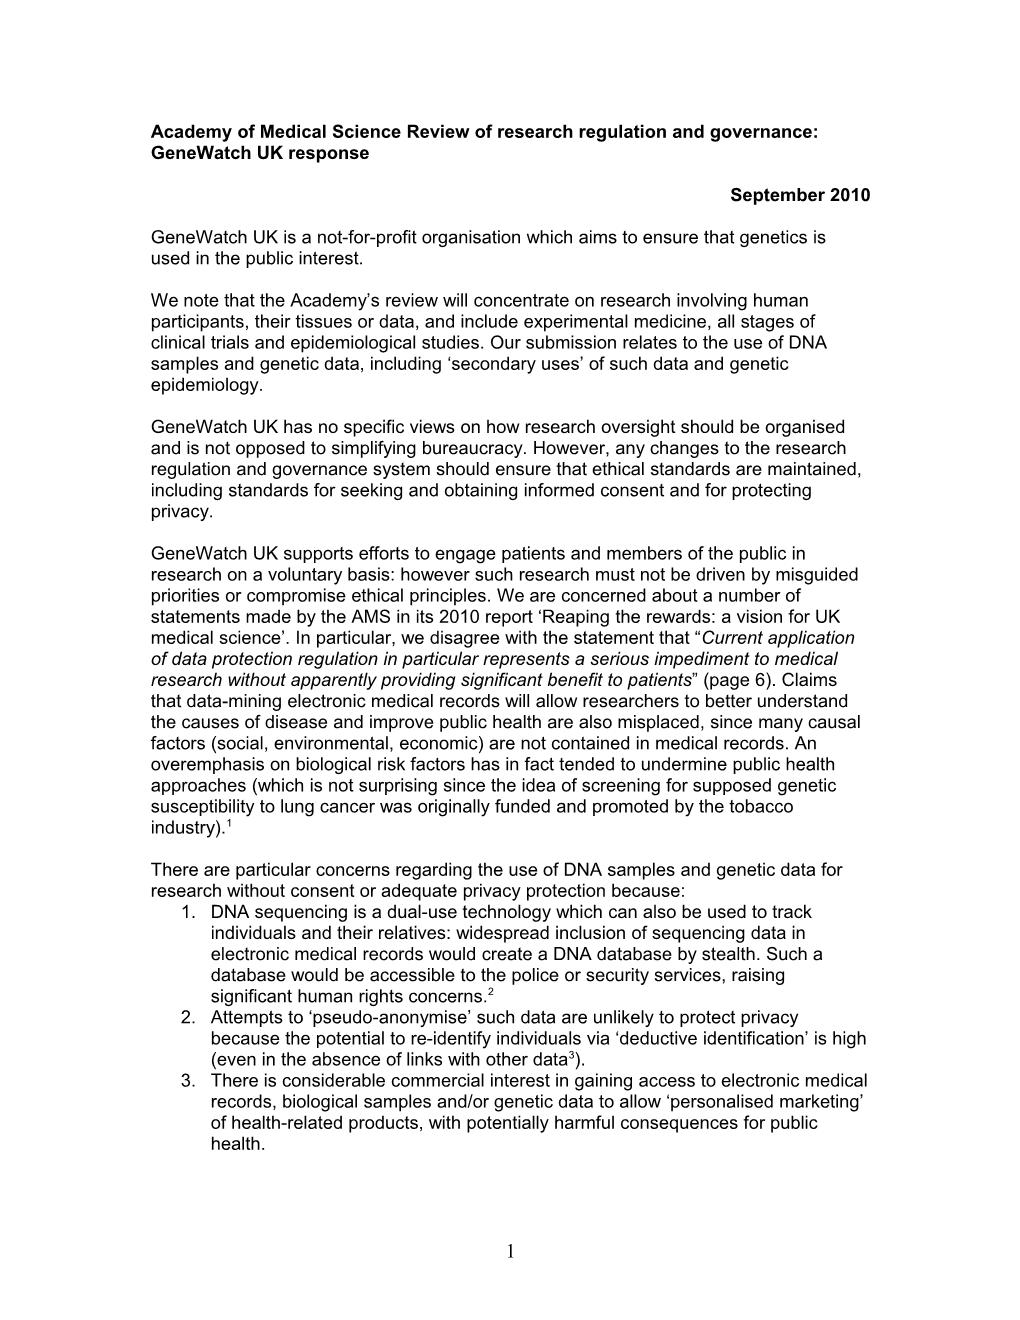 Academy of Medical Science Review of Research Regulation and Governance: Genewatch UK Response